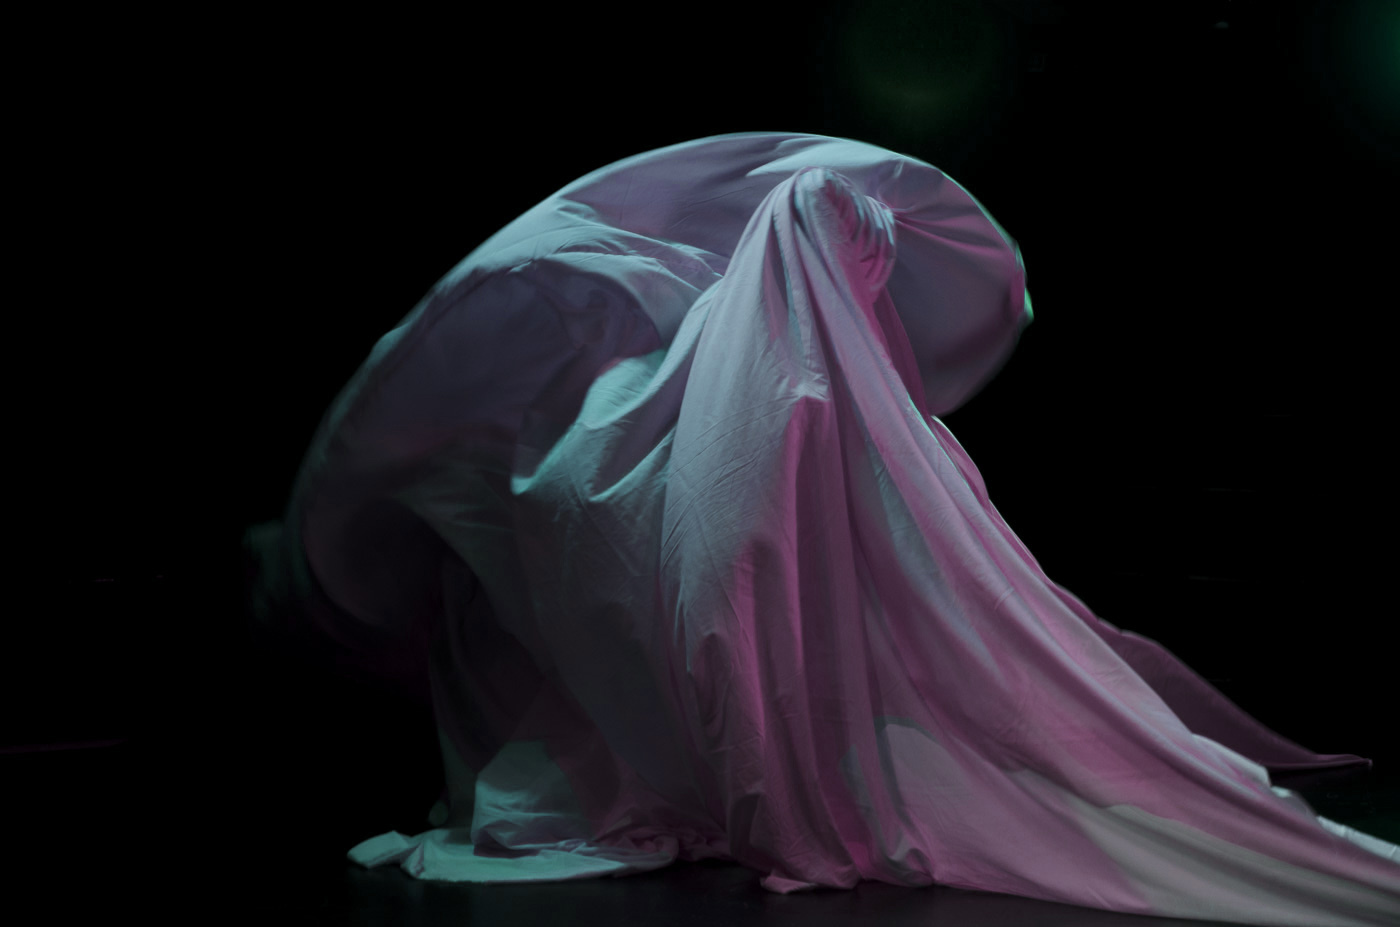 A bluish-green and pink lit fabric that appears to be captured in the middle of some sort of movement. There is a sense of spiraling and twisting of the fabric.